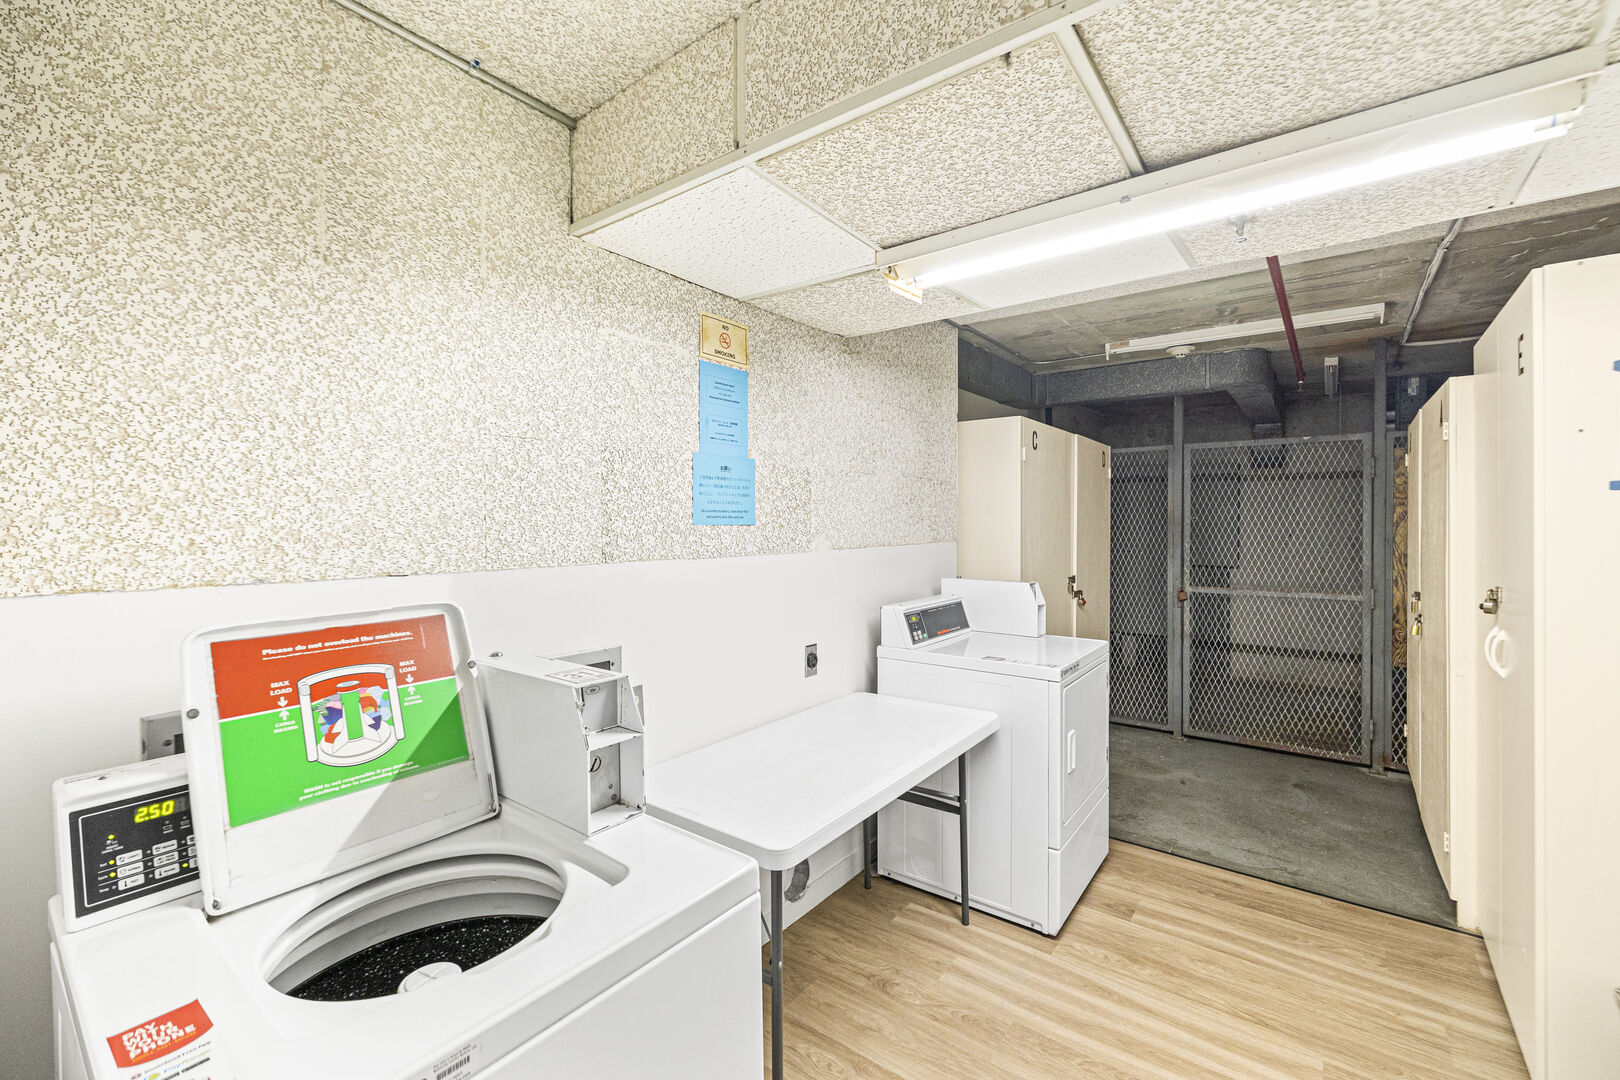 Laundry room on every floor with coin-operated washer and dryer